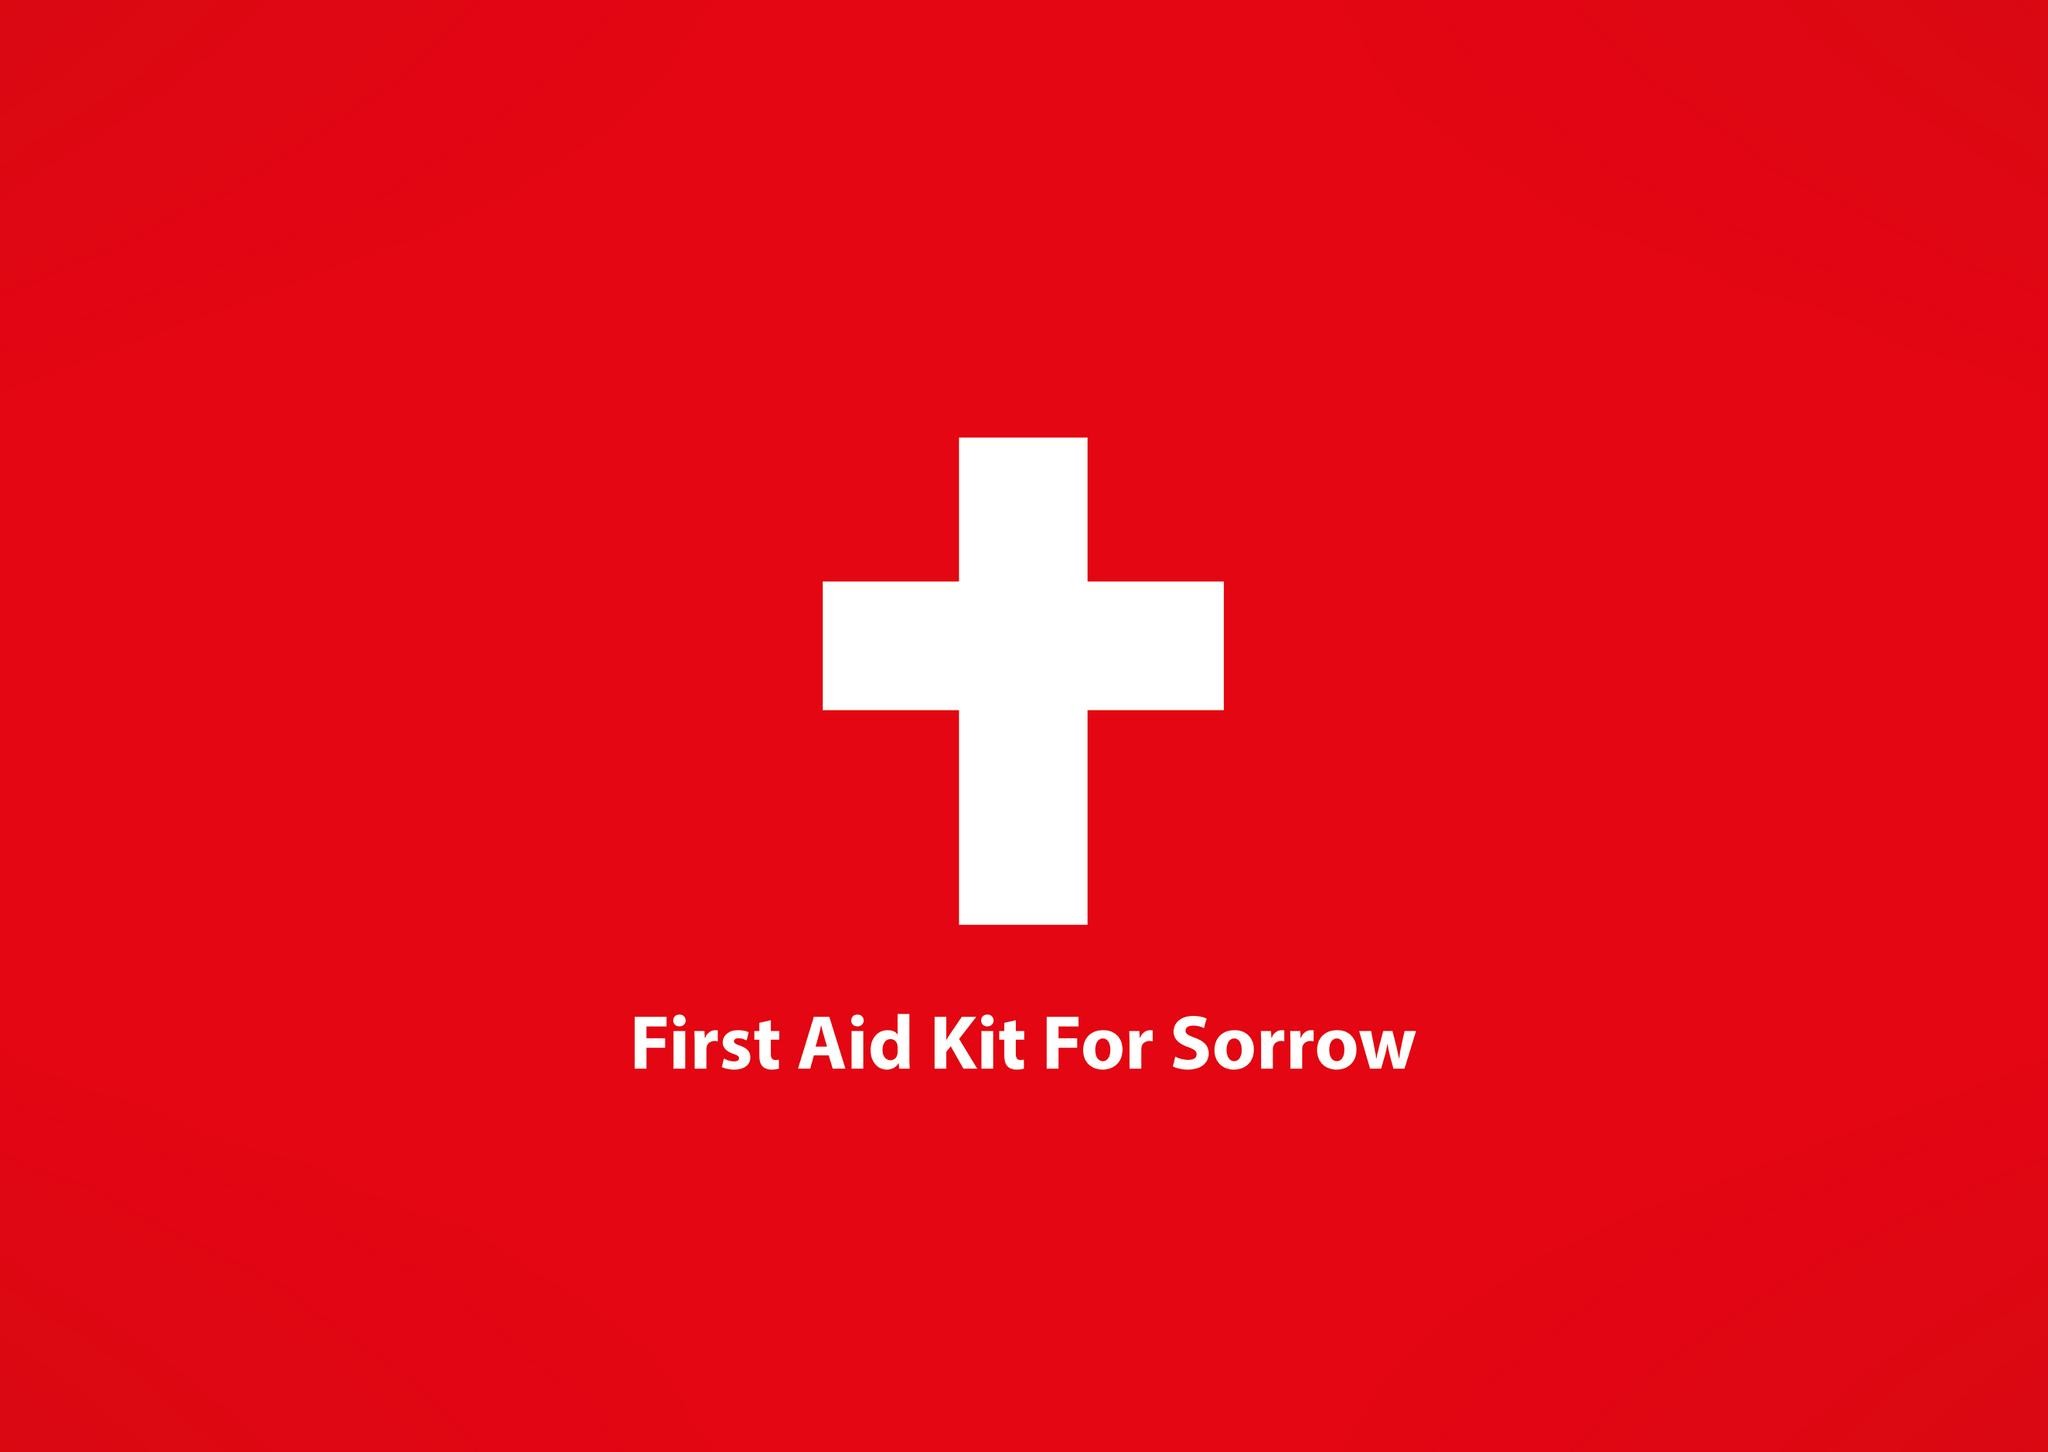 First Aid Kit For Sorrow